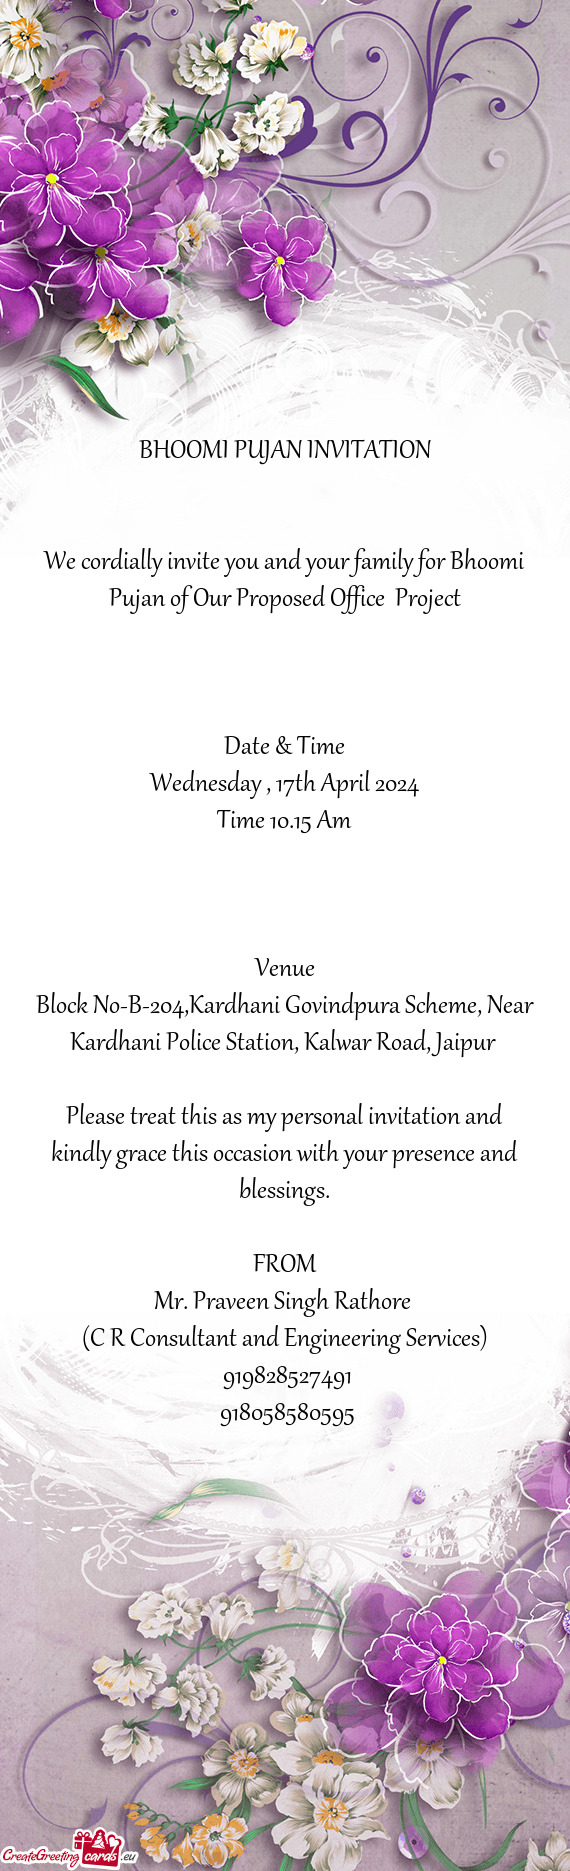 We cordially invite you and your family for Bhoomi Pujan of Our Proposed Office Project